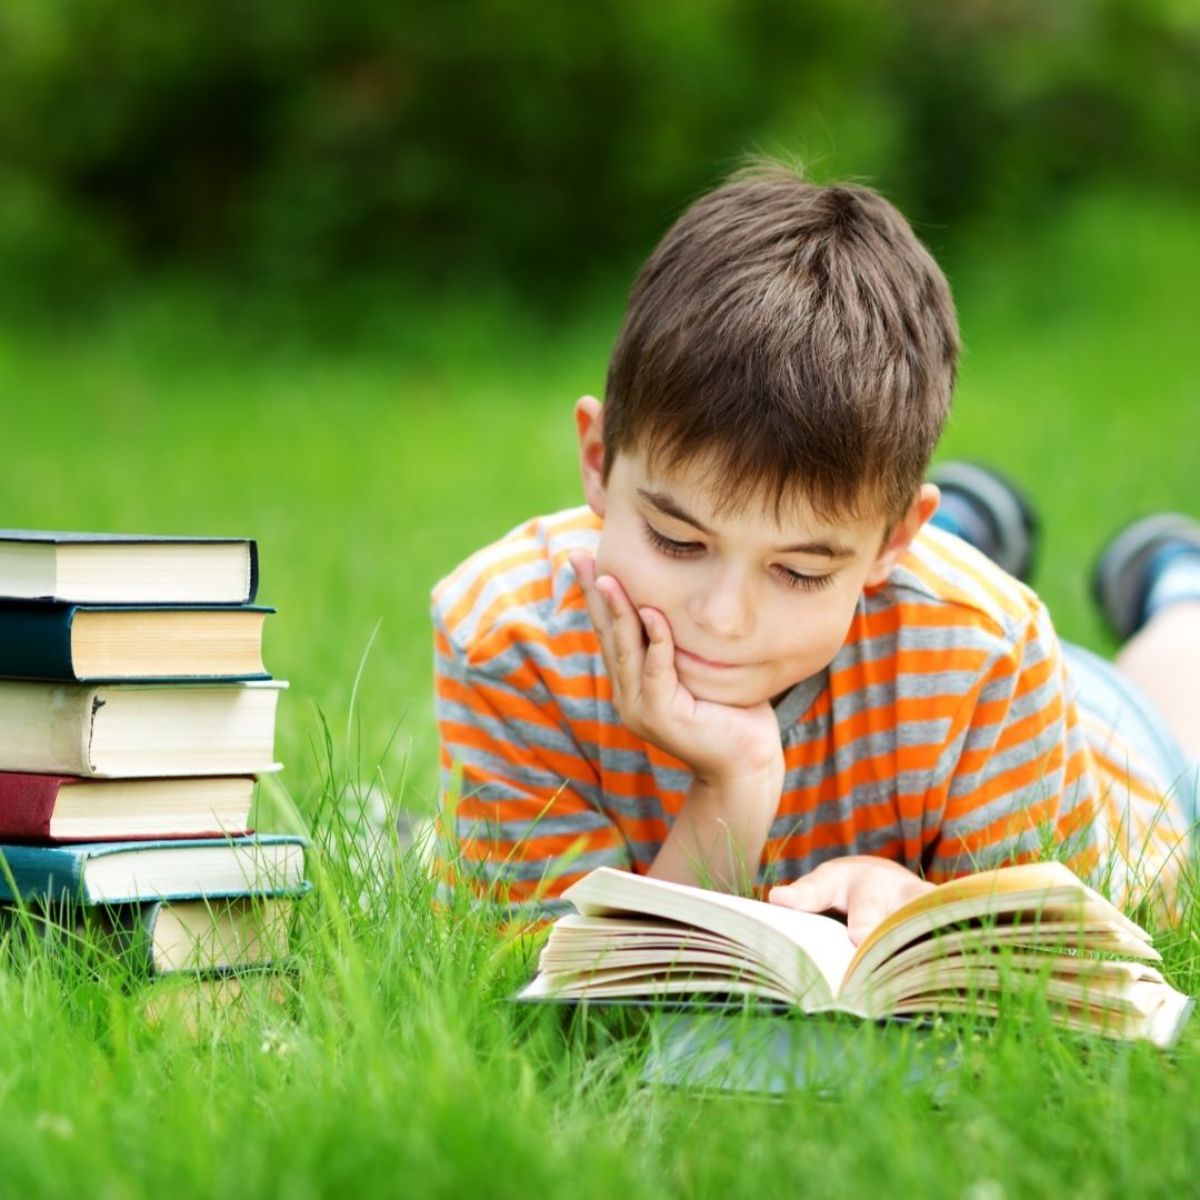 a boy in a ornage and grey striped shirt lays on the grass reading a book with a pile of books next to him